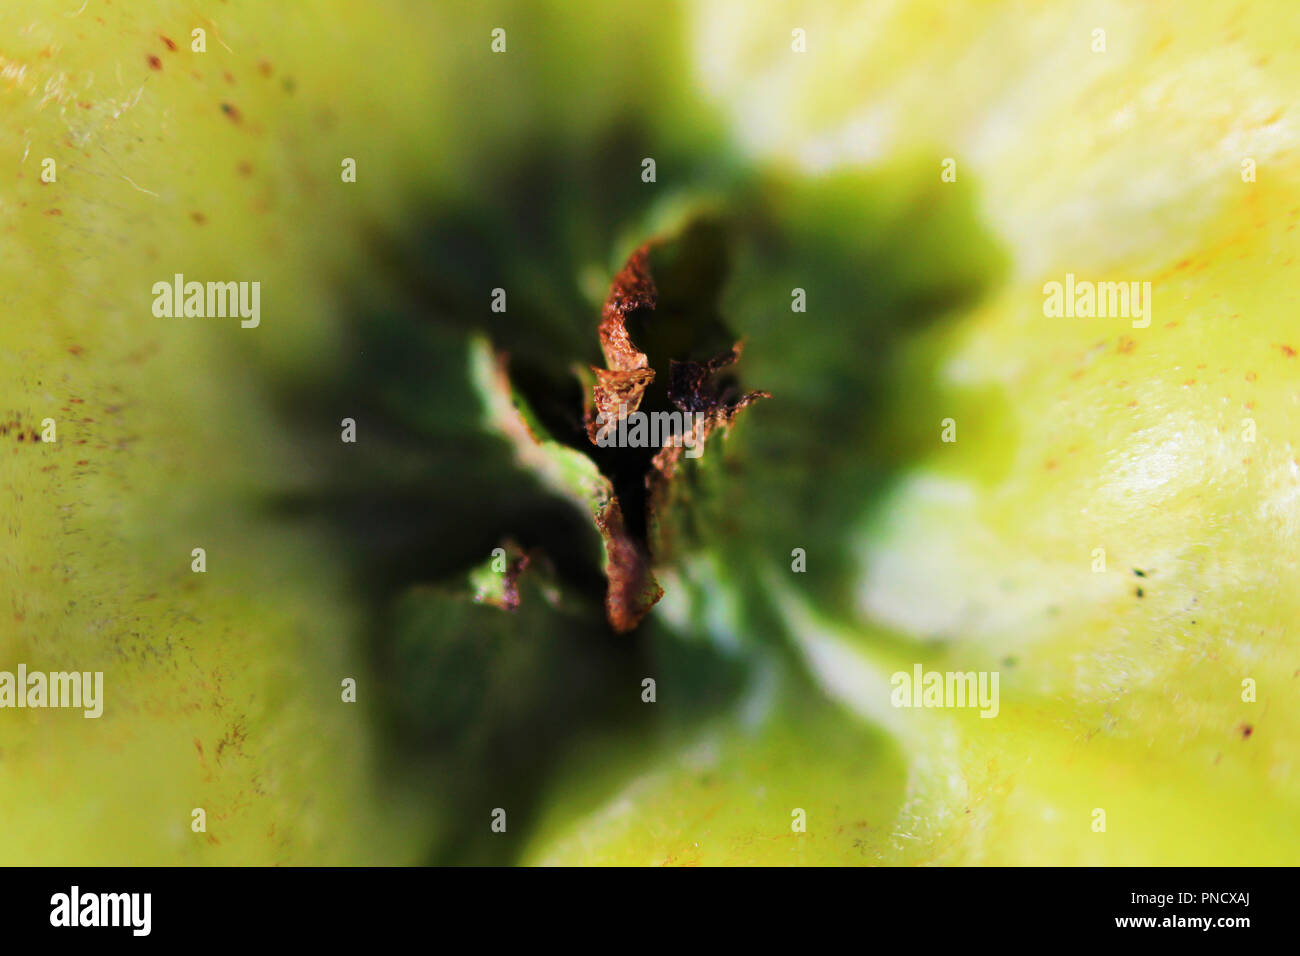 sepals and remains of stamens near a green apple. macro photography. Stock Photo